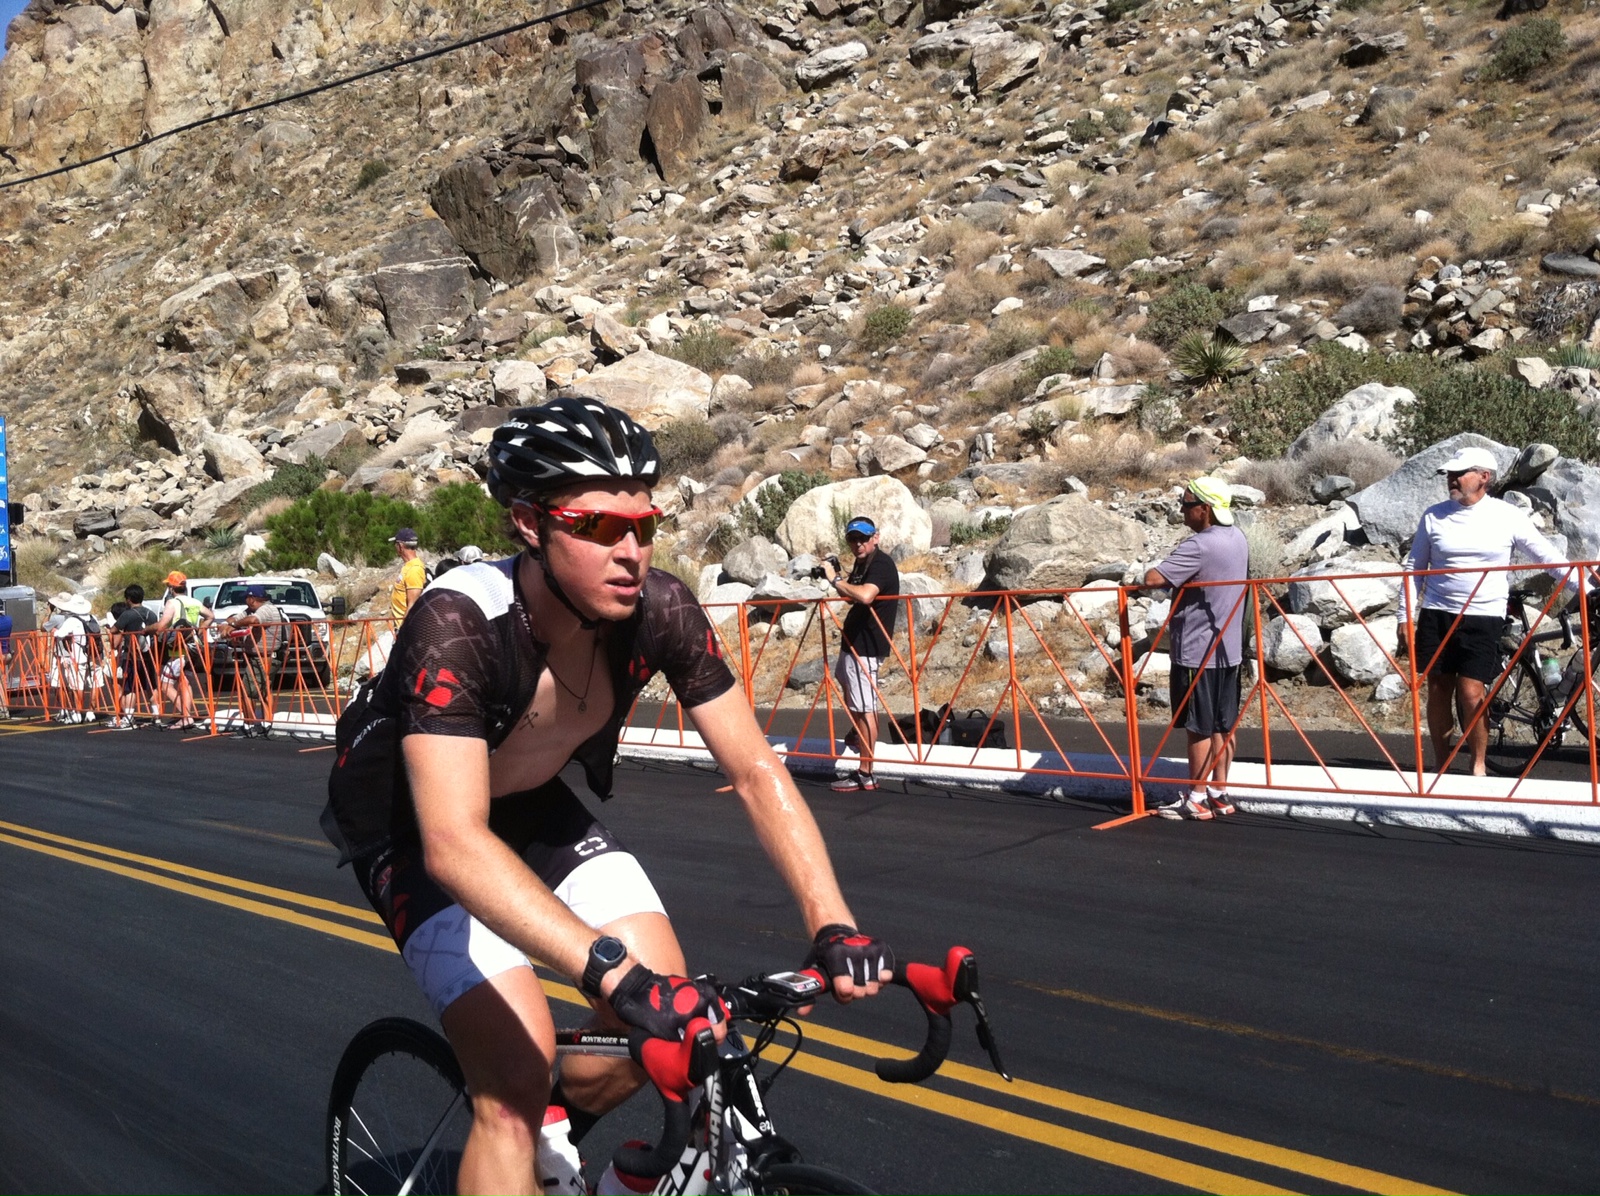 Utah’s Tanner Putt Currently 3rd Best Young Rider and 23rd Overall in 2013 Amgen Tour of California